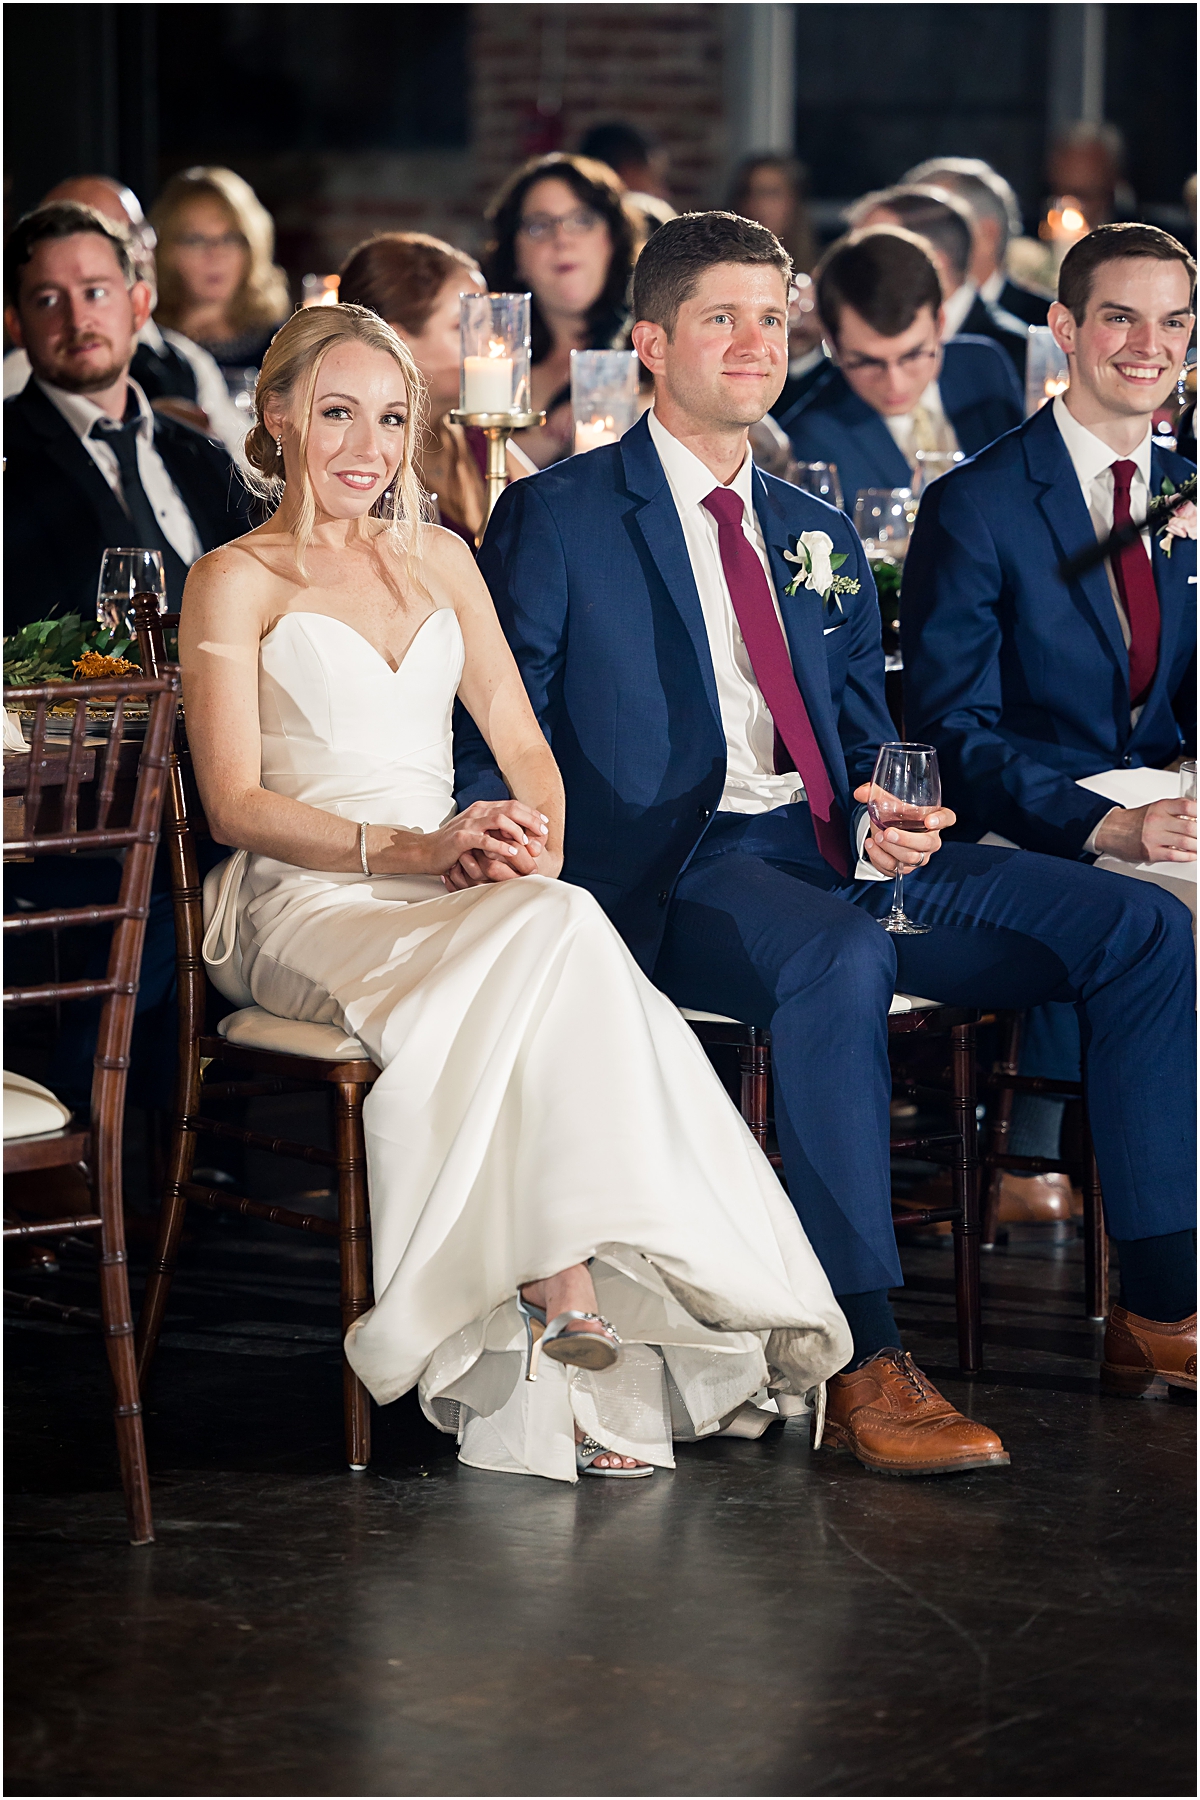 Rebecca and John listening to speeches during their reception at the foundry at puritan mill in georgia